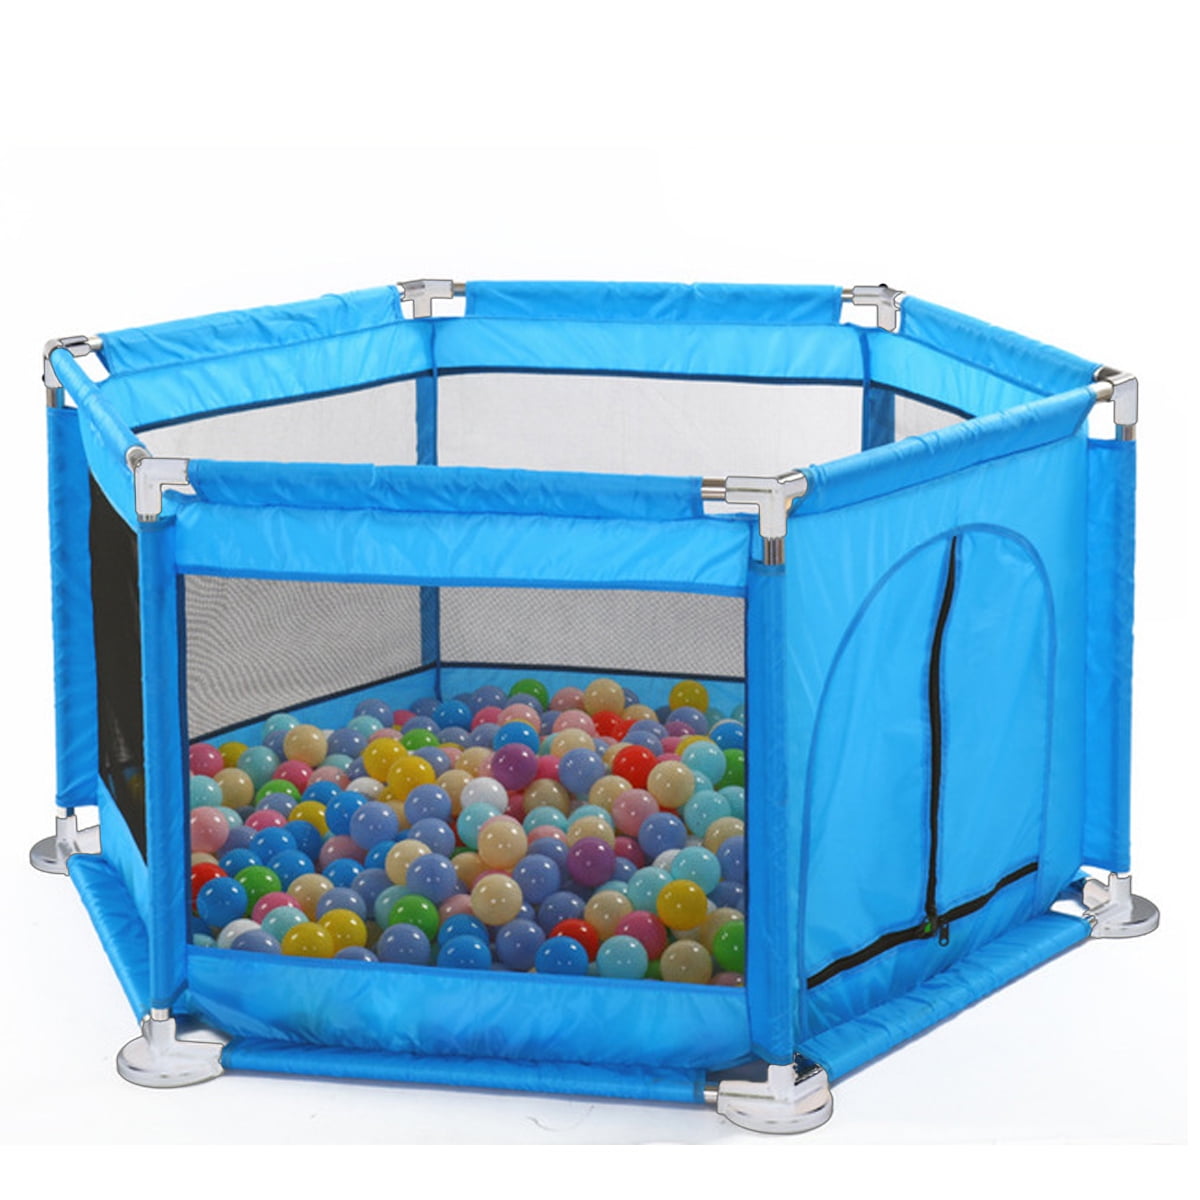 Foldable Kids Ocean Children Pool Ball Pit Game Play Toy Tent Baby-Safe PlaypeZN 